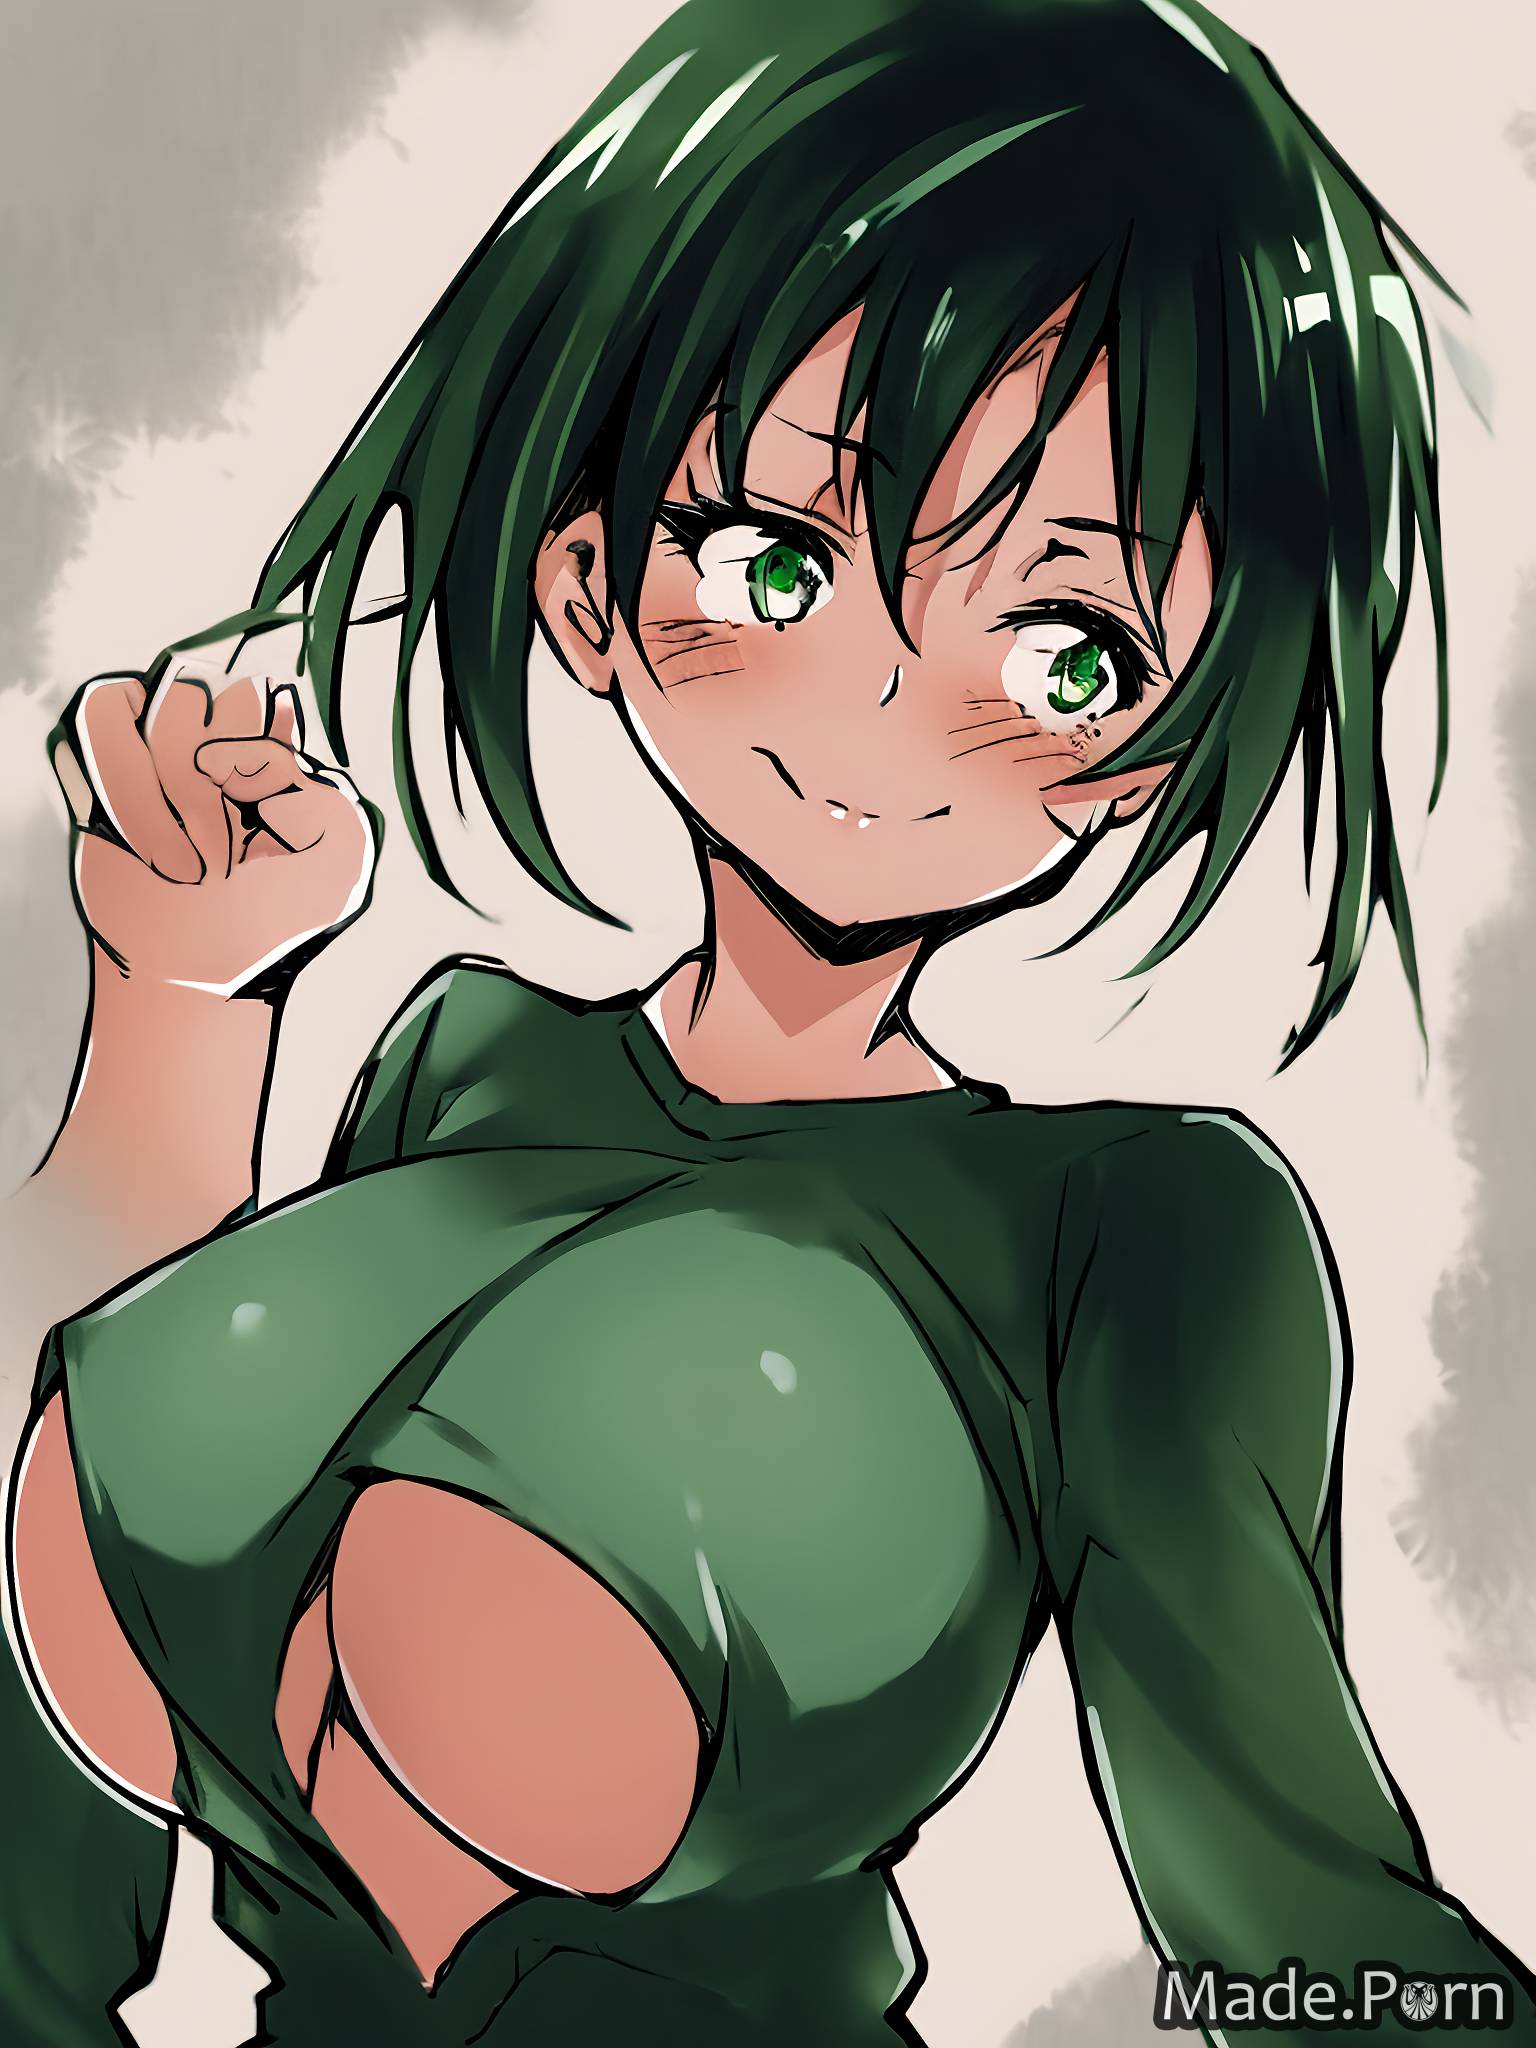 Anime Girl Emo Porn - Porn image of black hair emo happy anime short hair green 90s created by AI